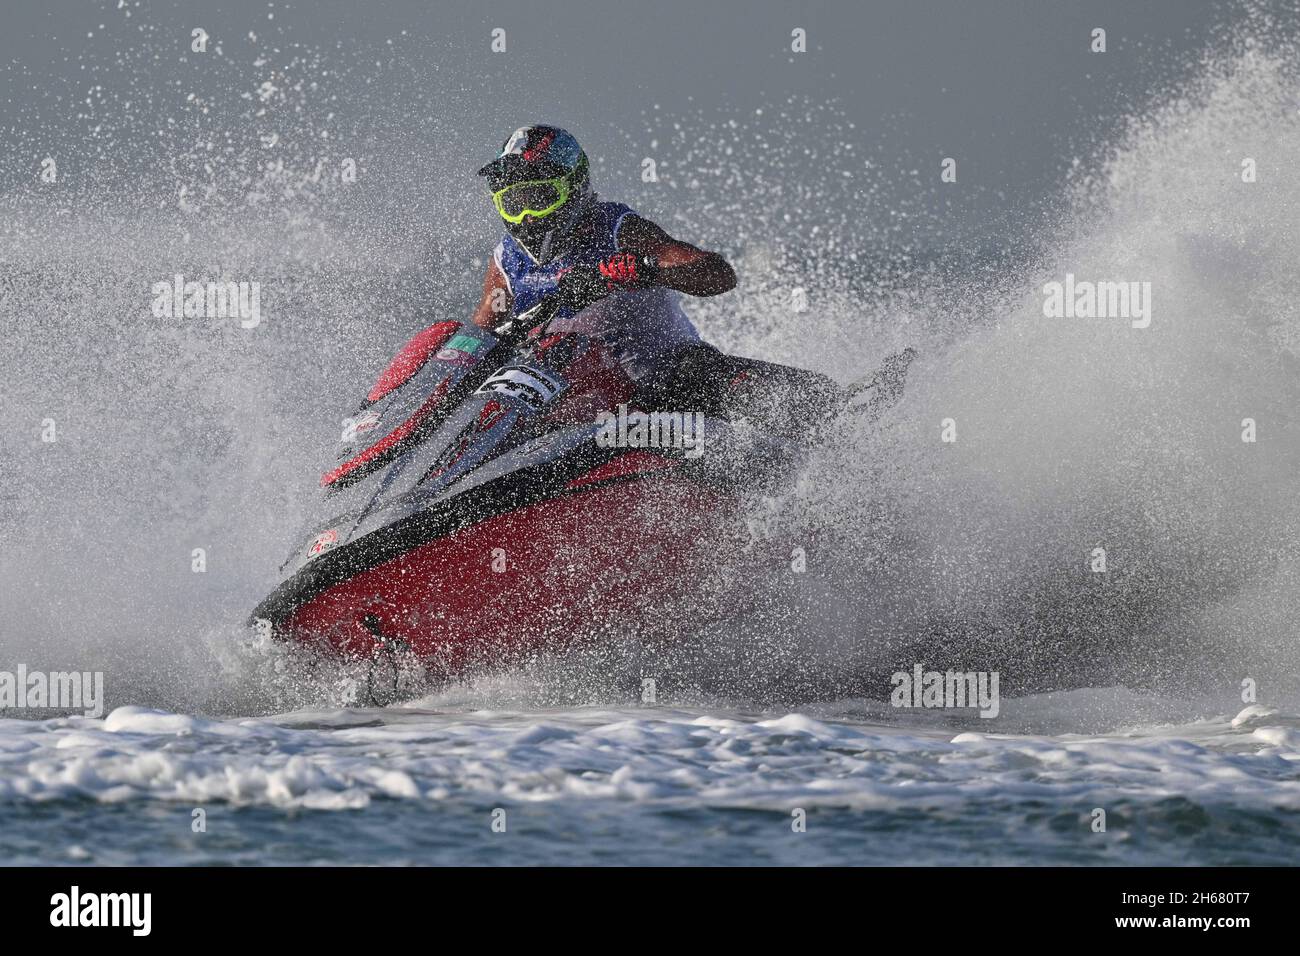 Kuwait City, Kuwait. 13th Nov, 2021. Fahad Al Rayes of Kuwait competes during the Runabout GP1 of the UIM-ABP Aquabike Class Pro World Championship in Kuwait City, Kuwait, Nov